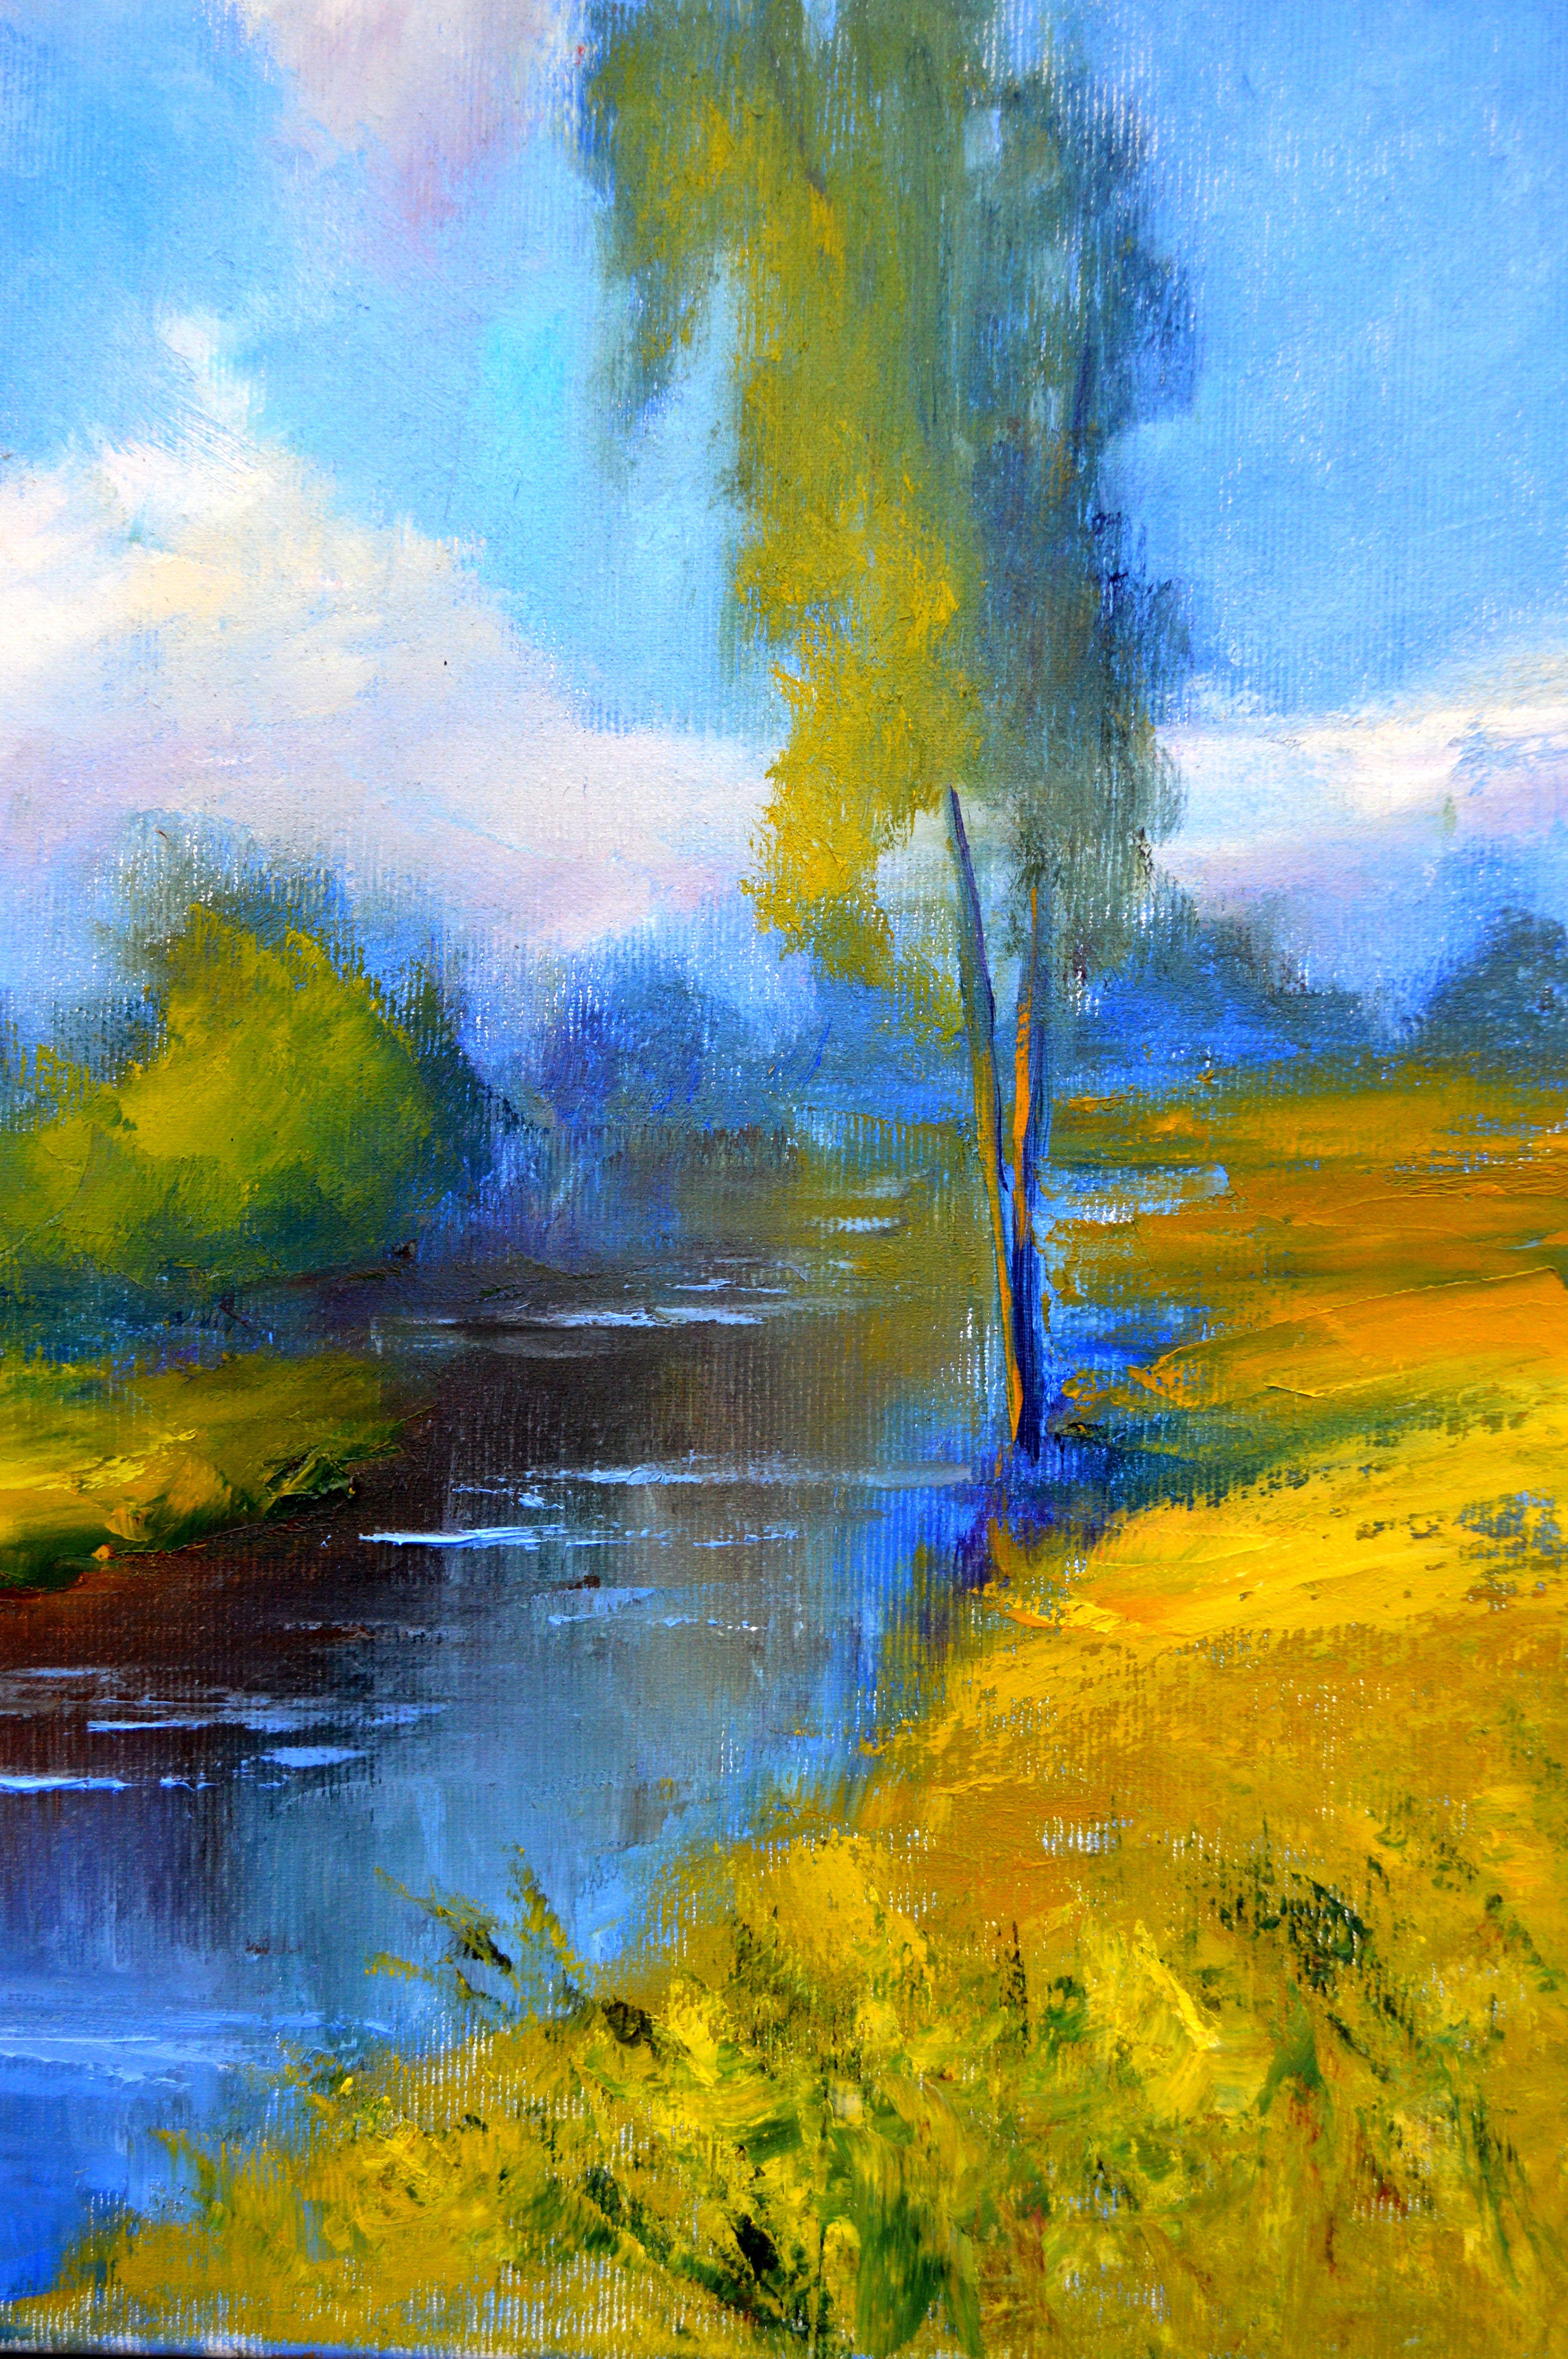 In this piece, I've merged the vibrant fluidity of impressionism with the vivid reality of fine art. I wanted the tranquility of the village river to envelop the viewer, the expressionist streaks and realistic reflections to stir emotions of peace